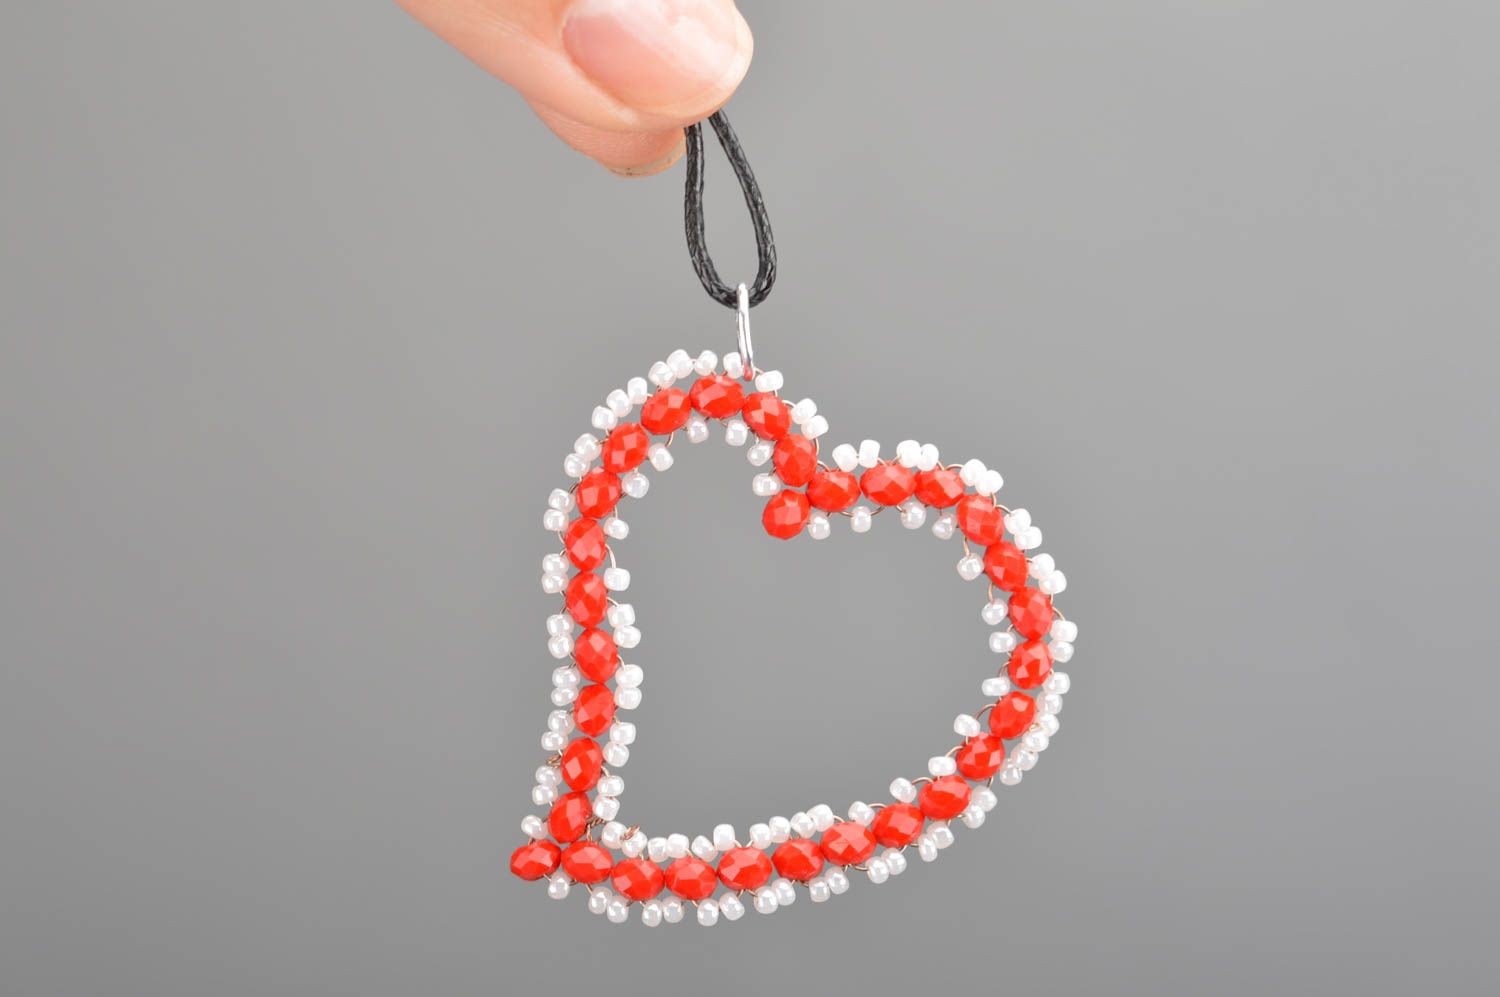 Handmade designer red heart shaped pendant with Czech crystal beads on cord photo 3